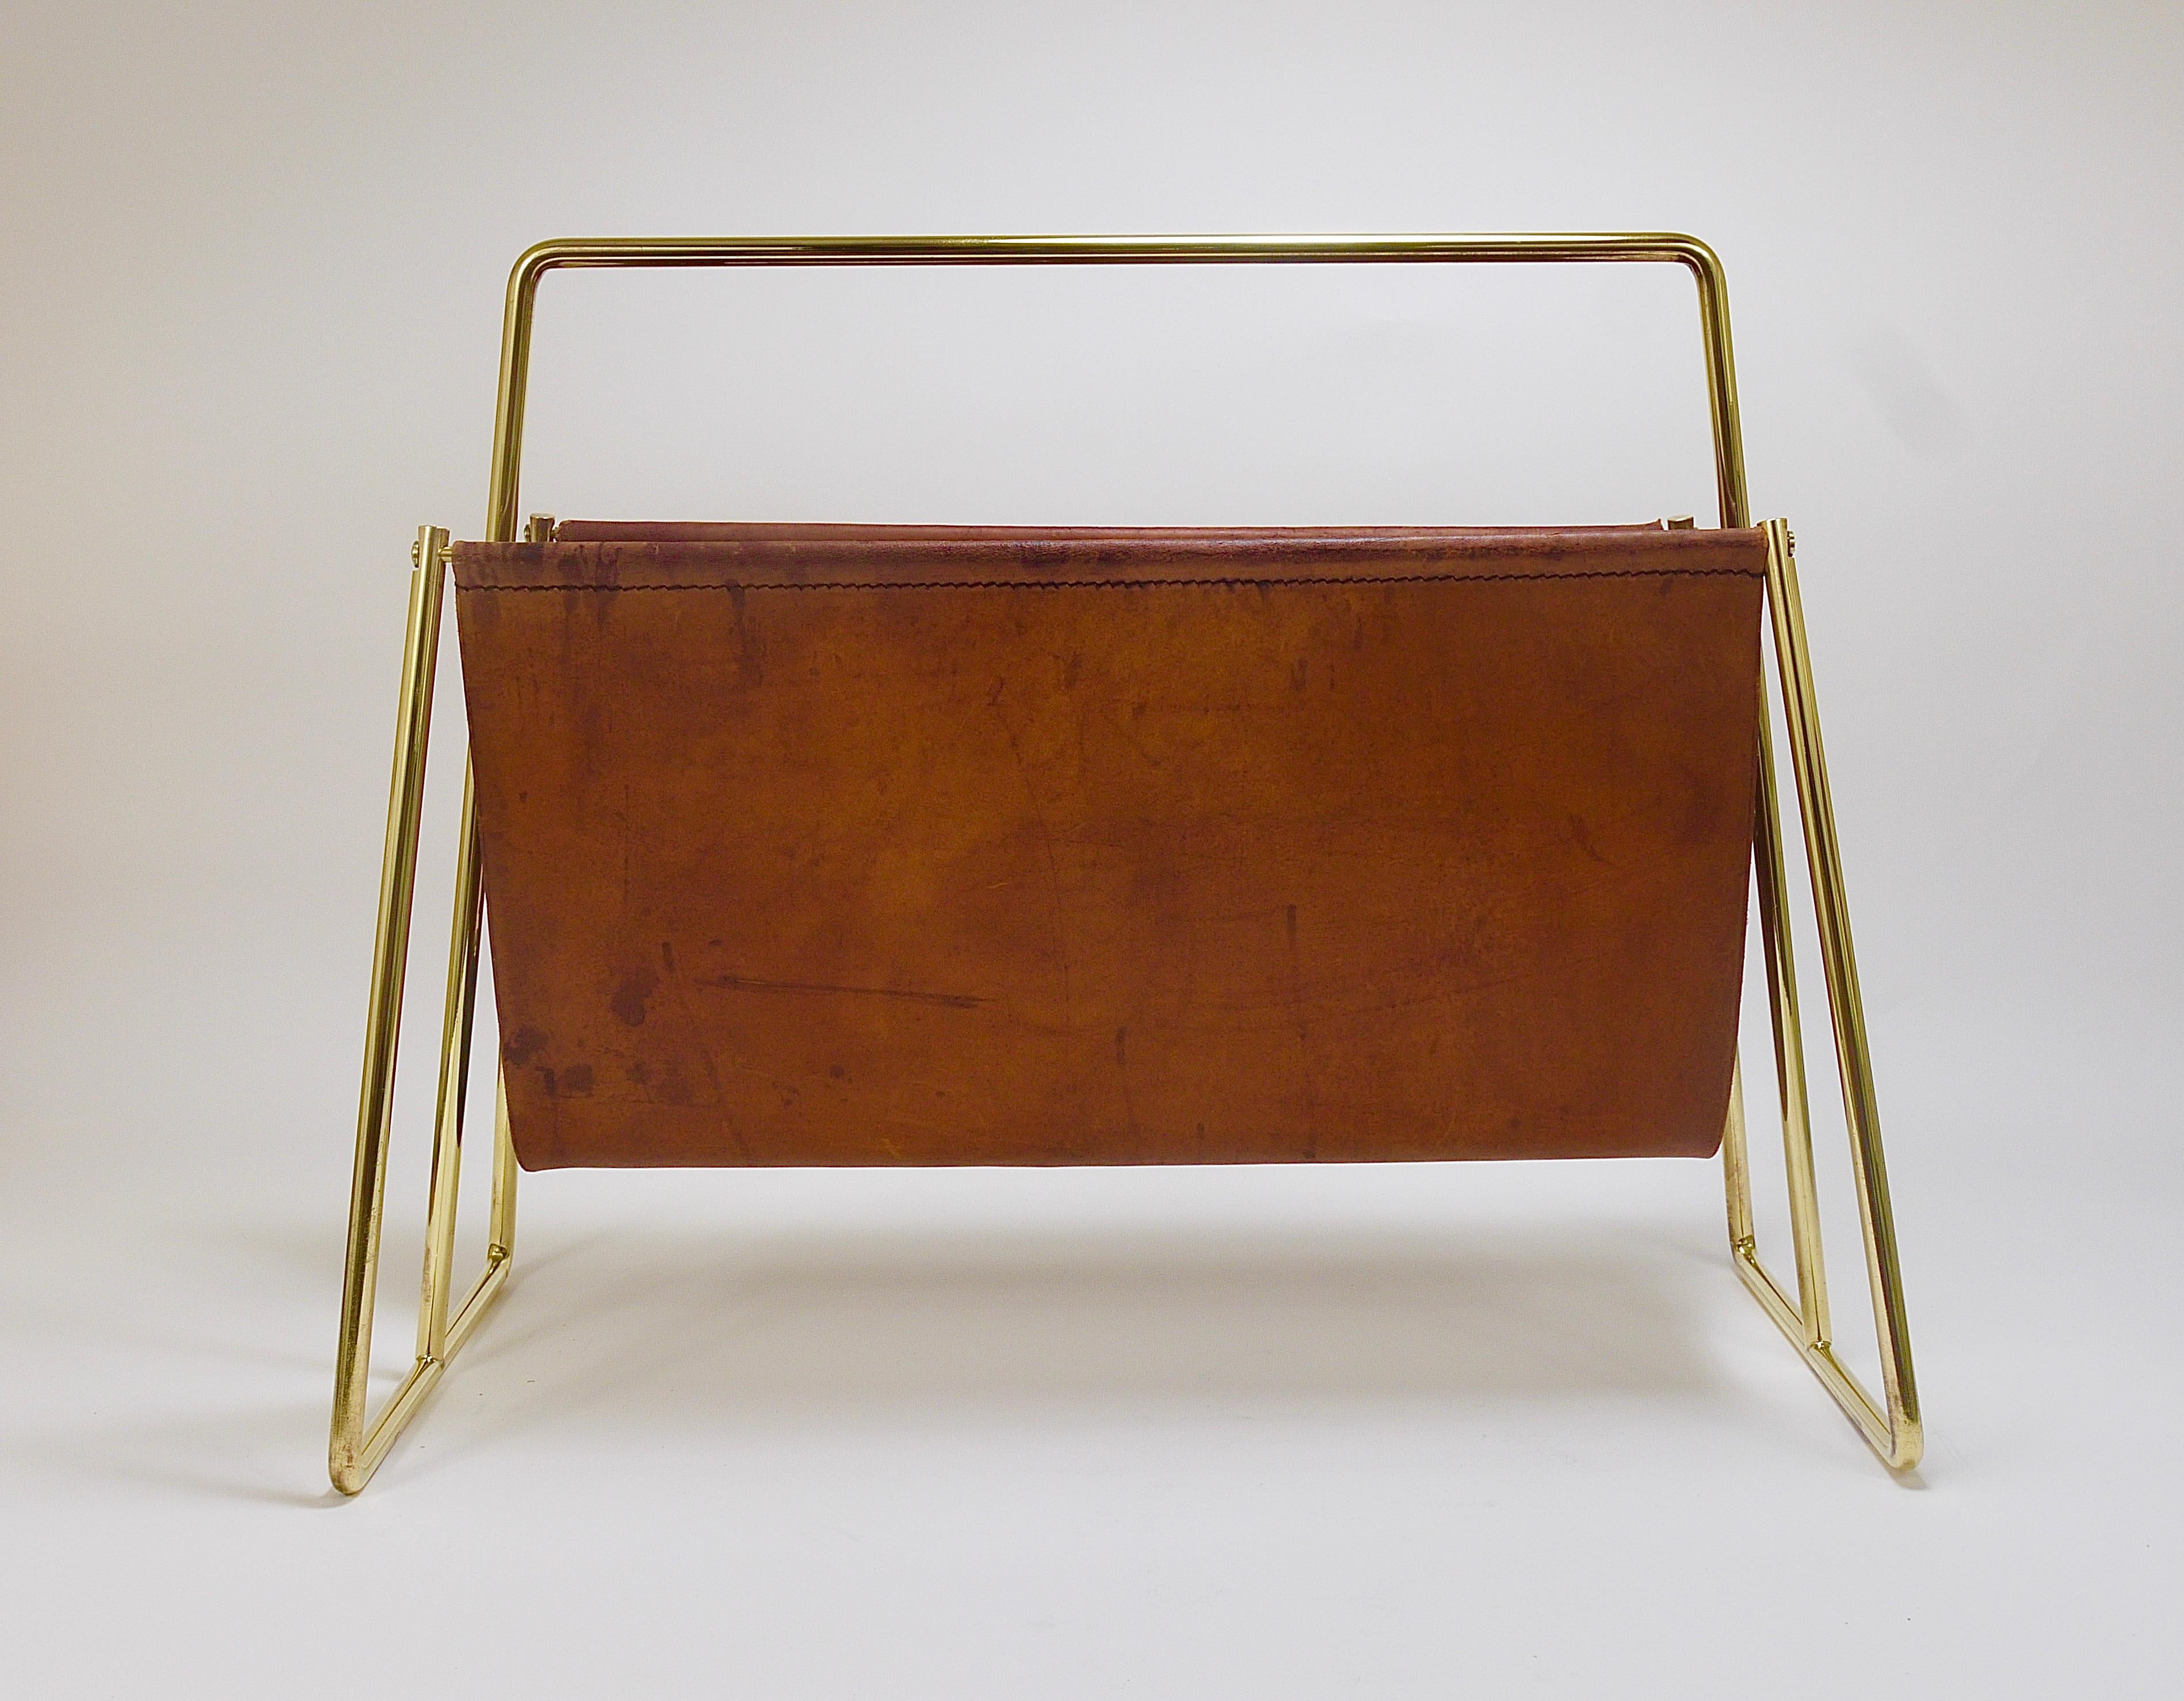 A beautiful midcentury original and old newspaper stand / magazine rack from the 1950s. This is the large double-sided model No. 4101. Designed and manufactured by Carl Auböck in Vienna, Austria. Its solid brass frame has been polished by hand and